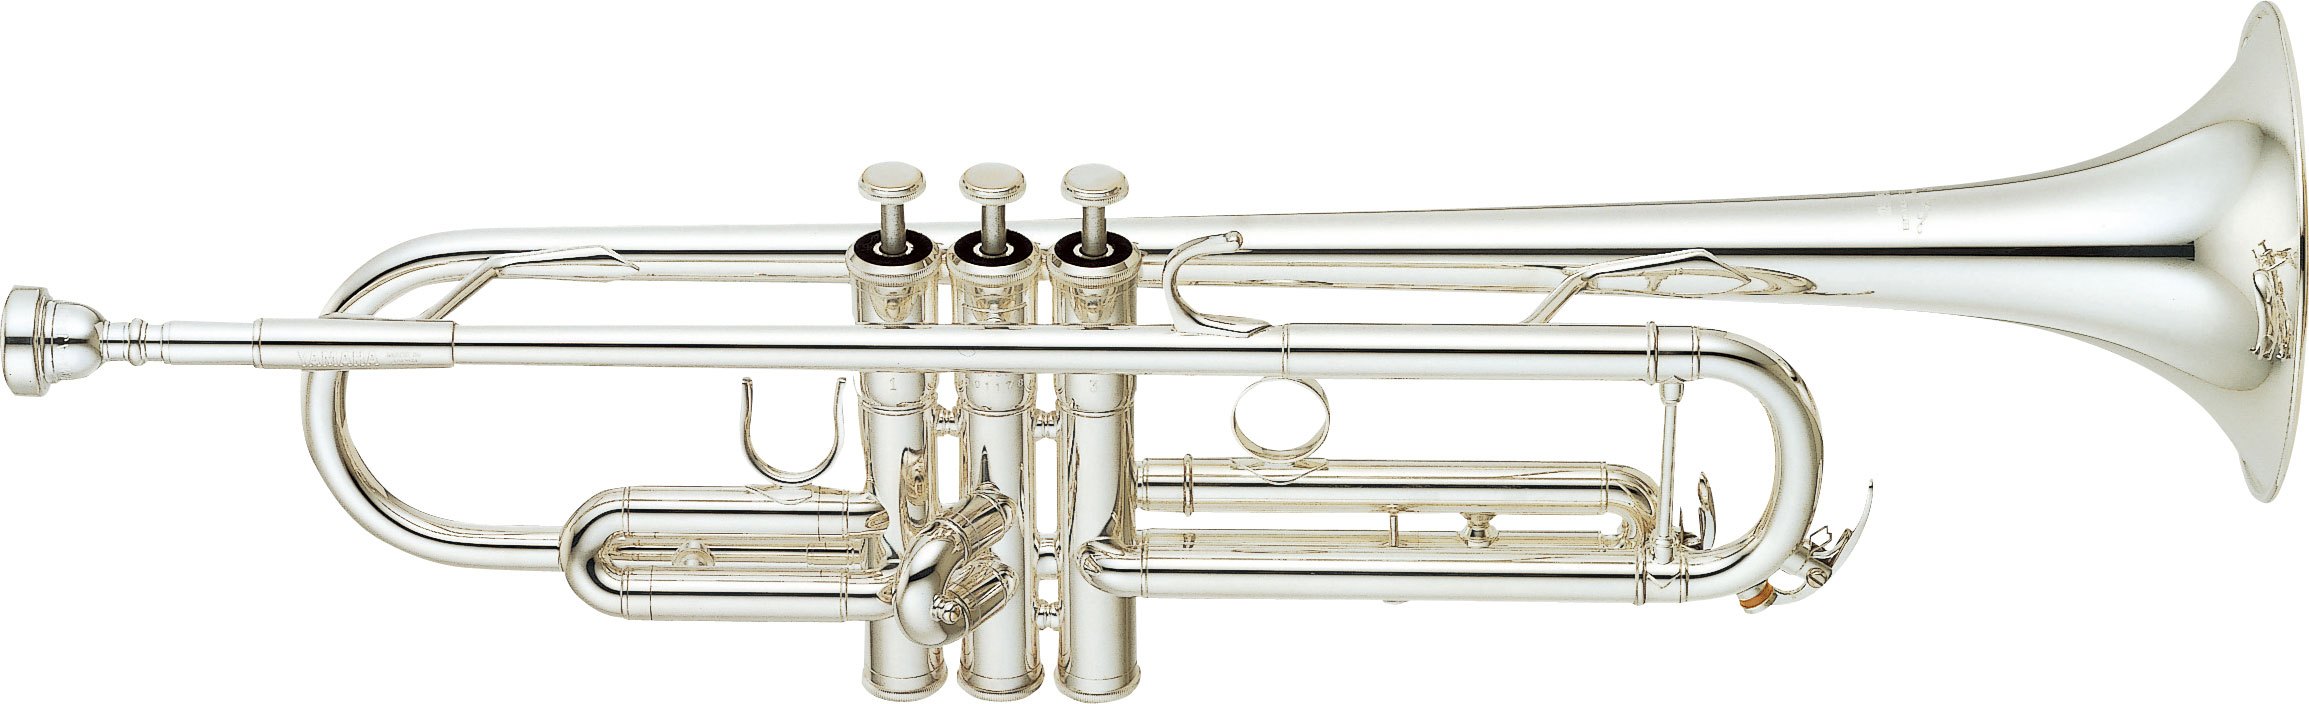 YTR-6335 - Overview - Bb Trumpets - Trumpets - Brass & Woodwinds 